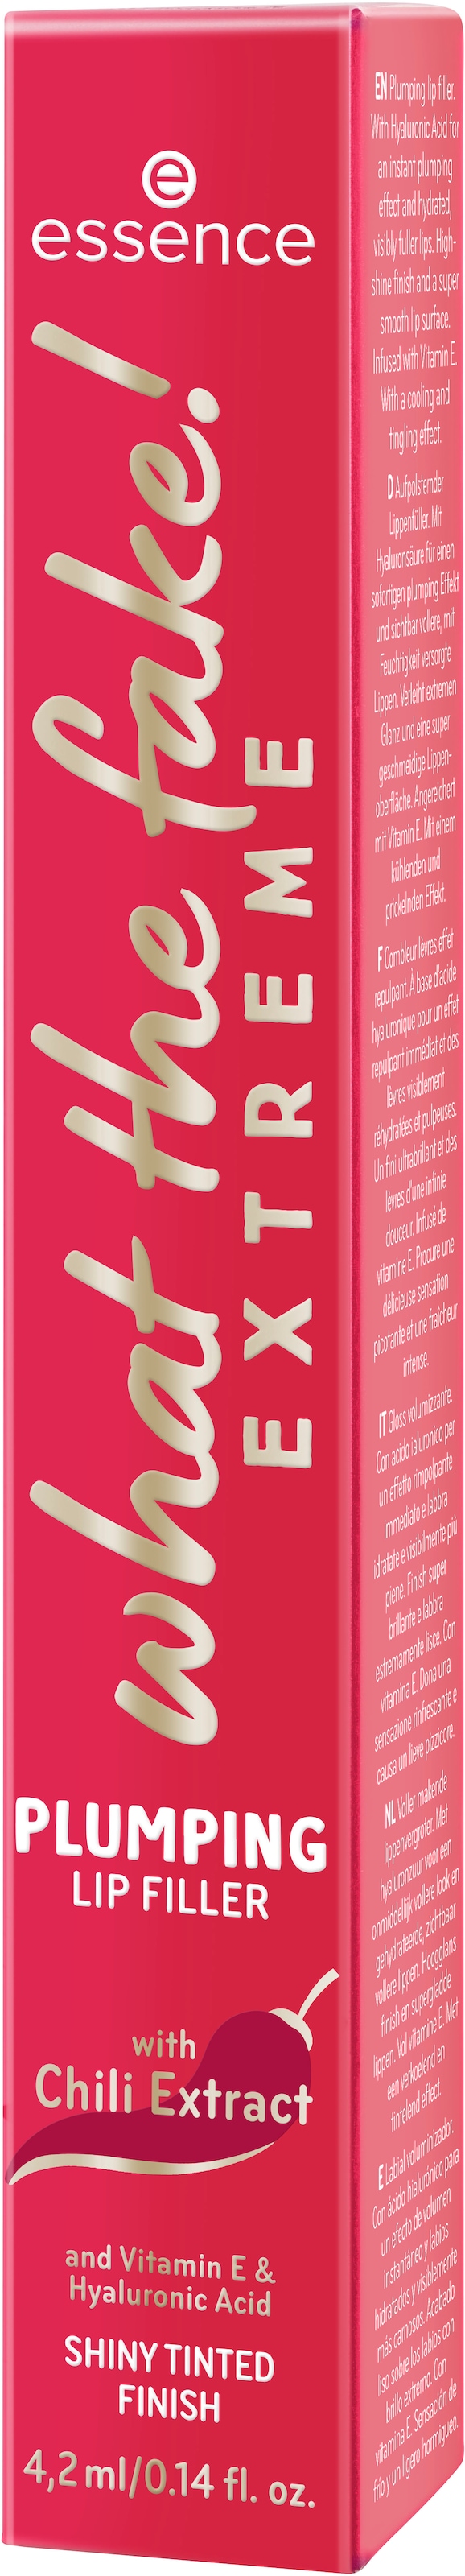 FILLER«, bei PLUMPING fake! »what EXTREME tlg.) (Set, Lip-Booster 3 Essence LIP the ♕